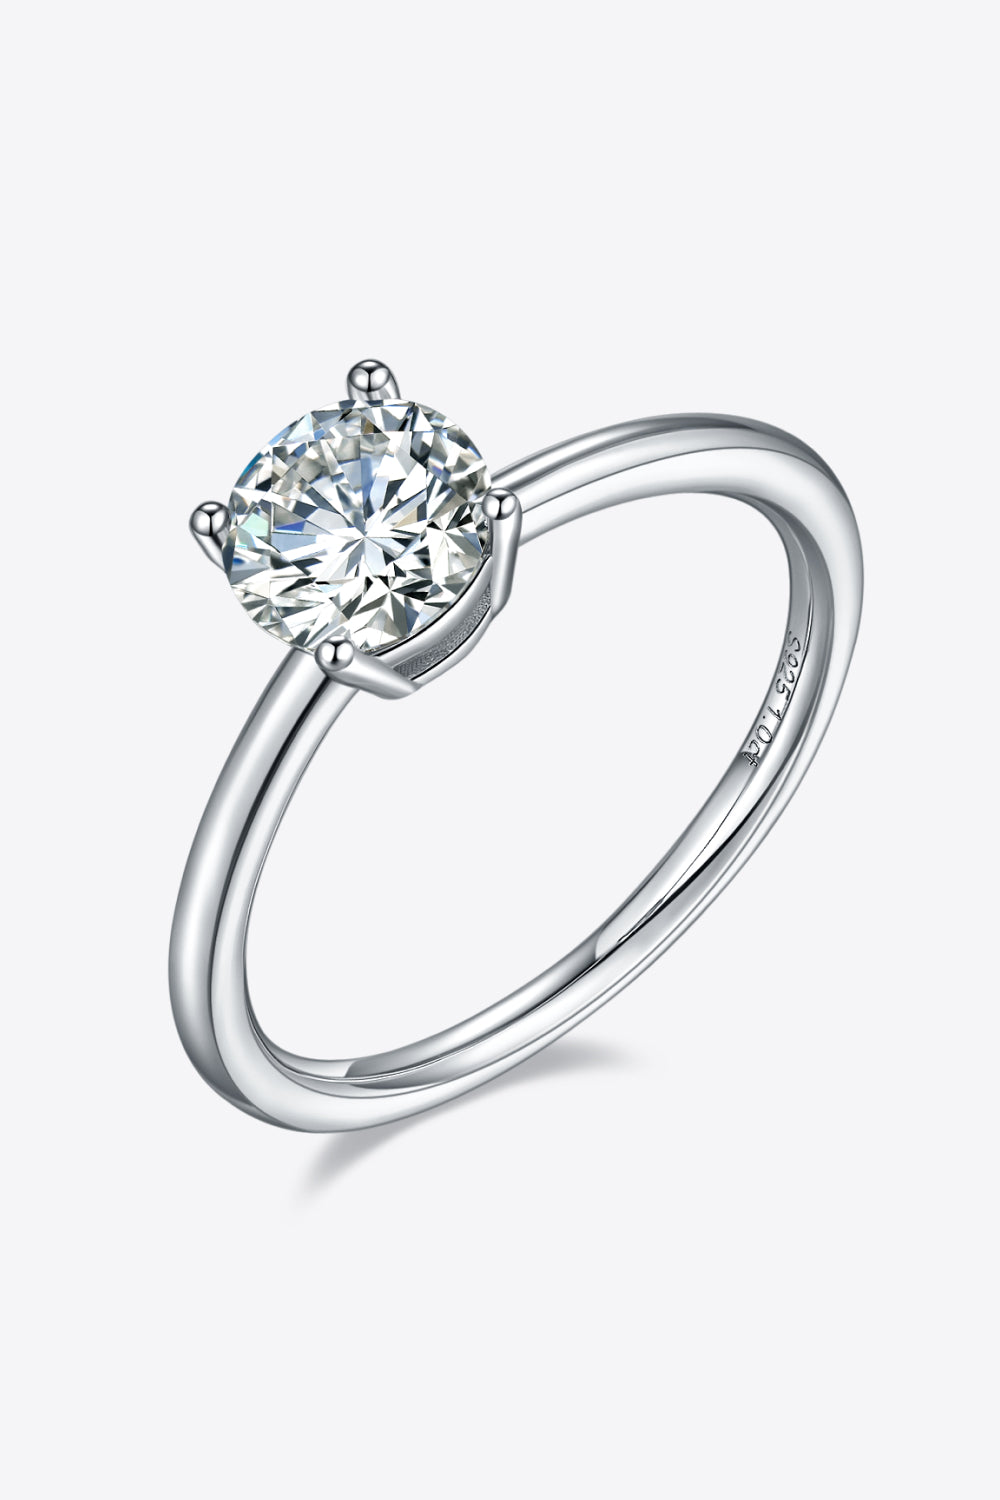 1 Carat Moissanite 925 Sterling Silver Solitaire Ring Round